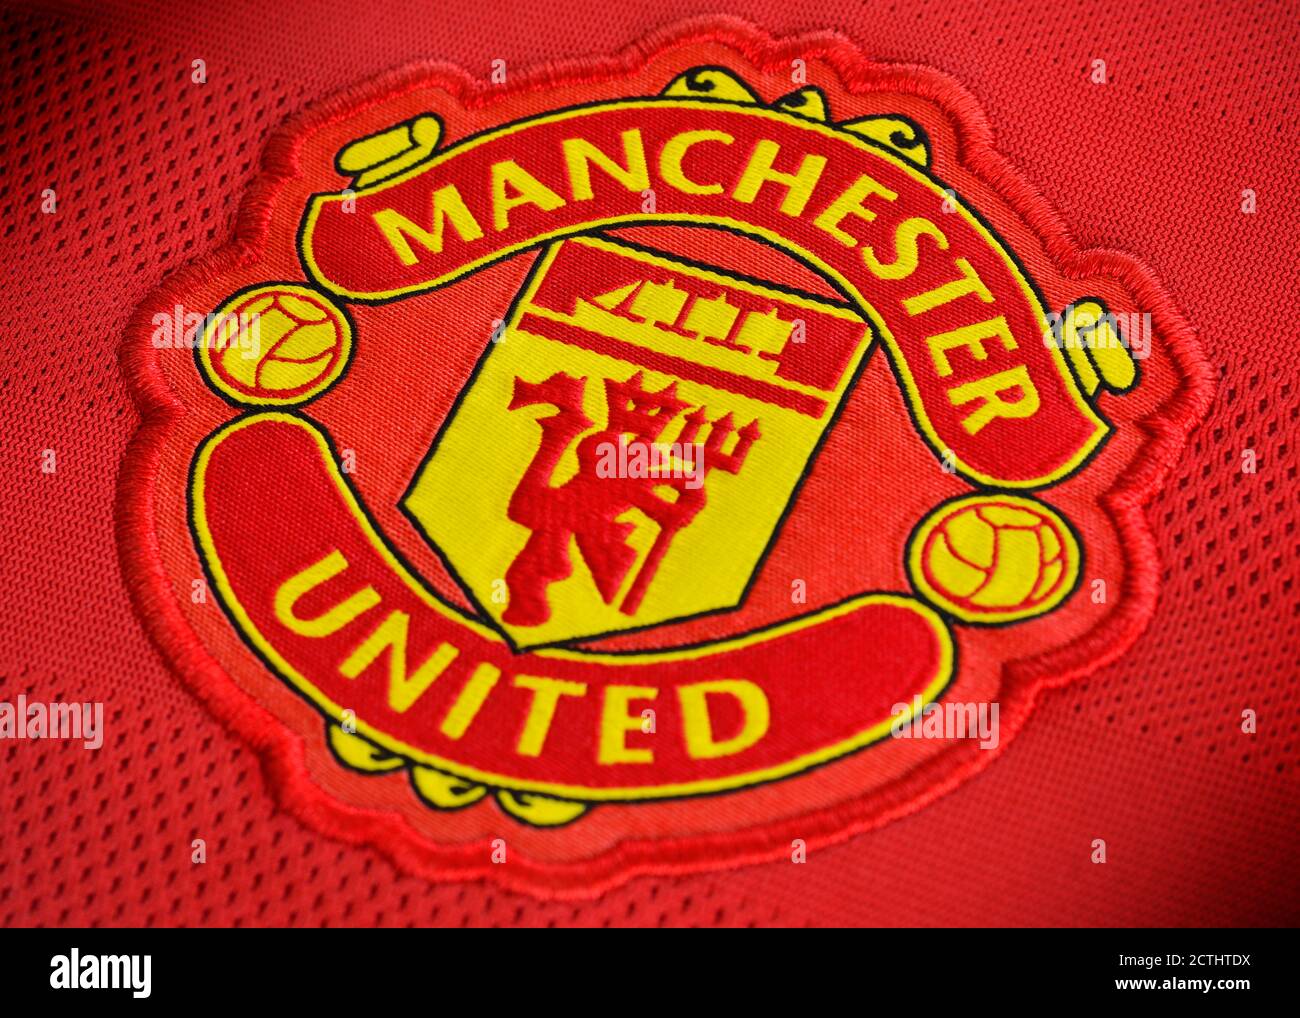 Manchester United Badge on a Football Shirt, Close Up Stock Photo